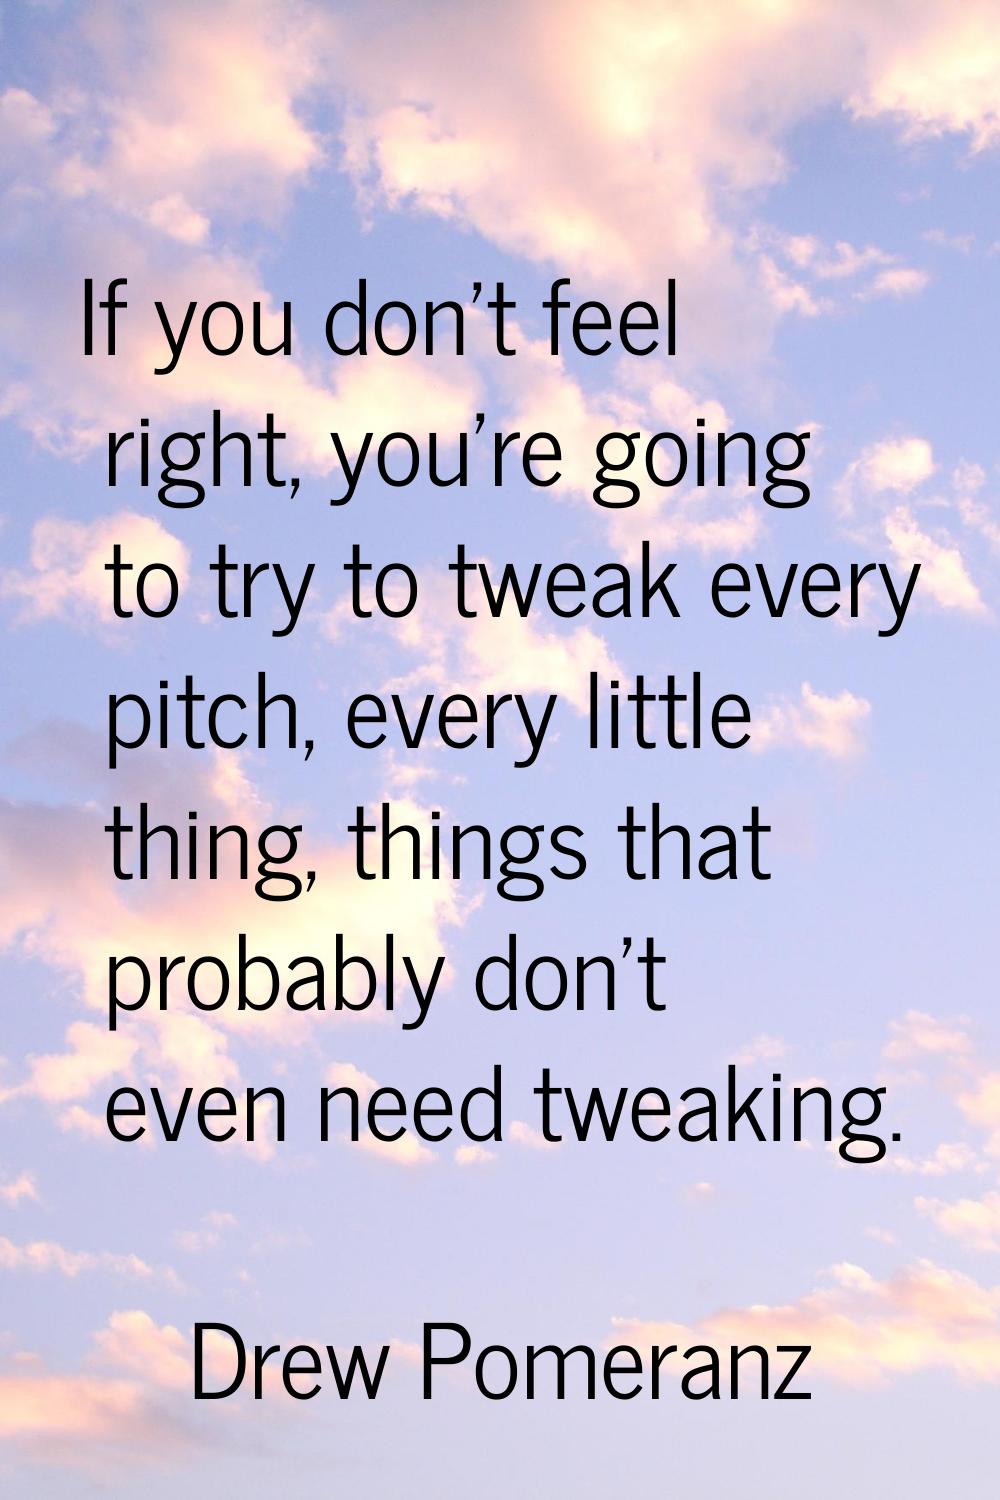 If you don't feel right, you're going to try to tweak every pitch, every little thing, things that 